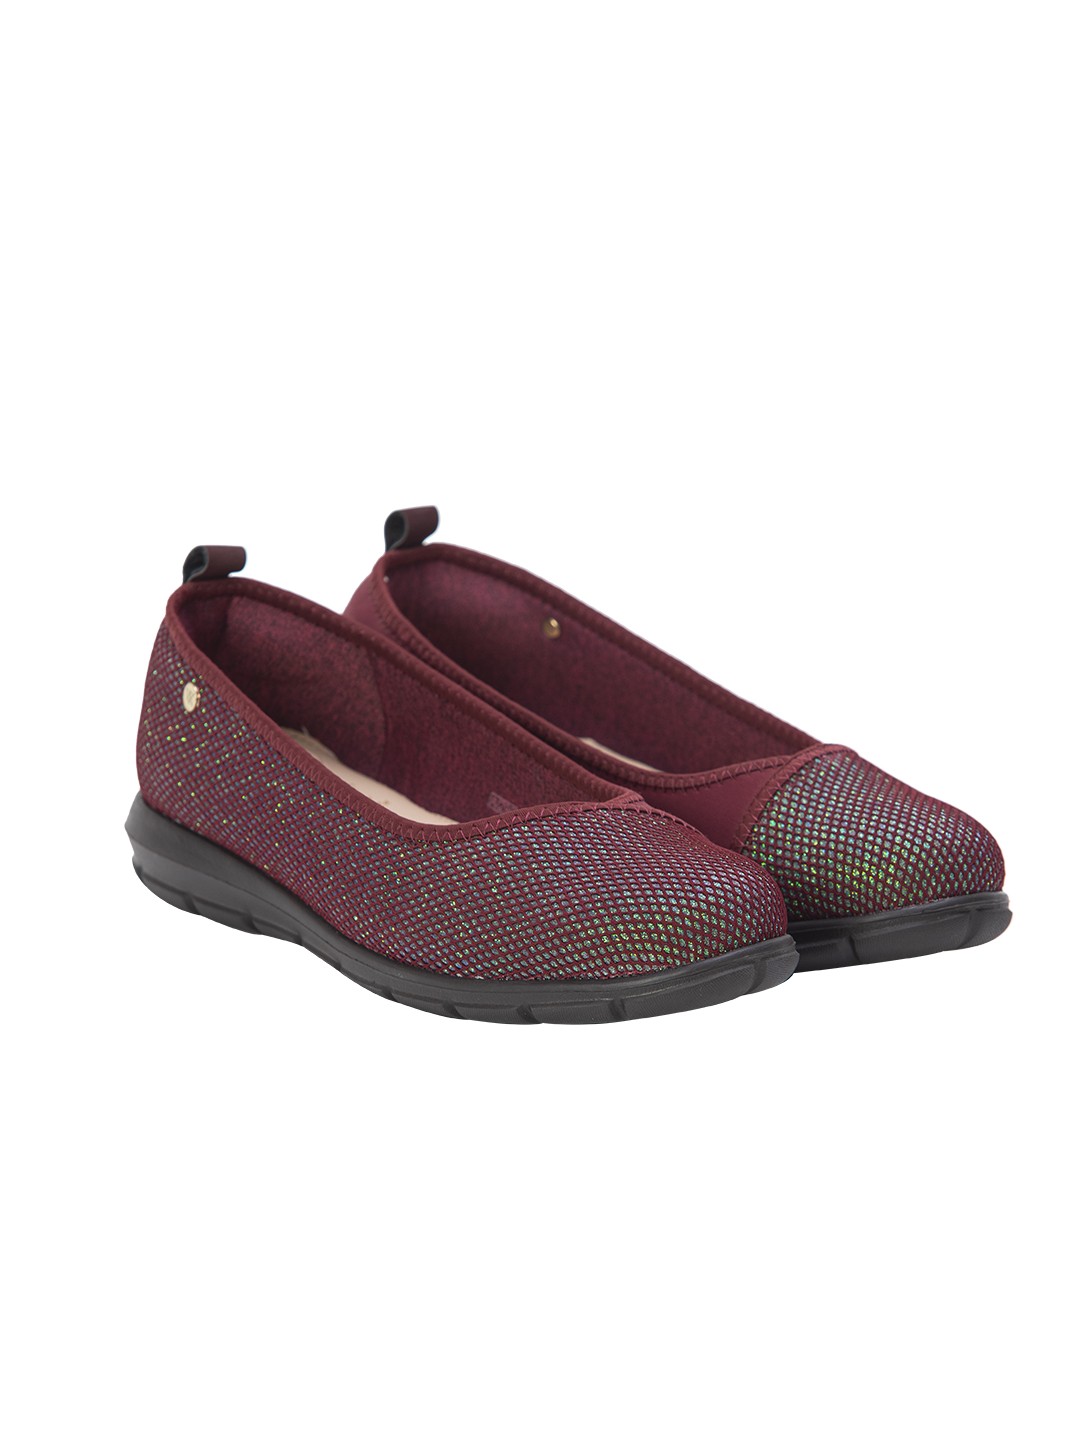 Buy Von Wellx Germany Comfort Pace Mehroon Casual Shoes Online in Bangalore